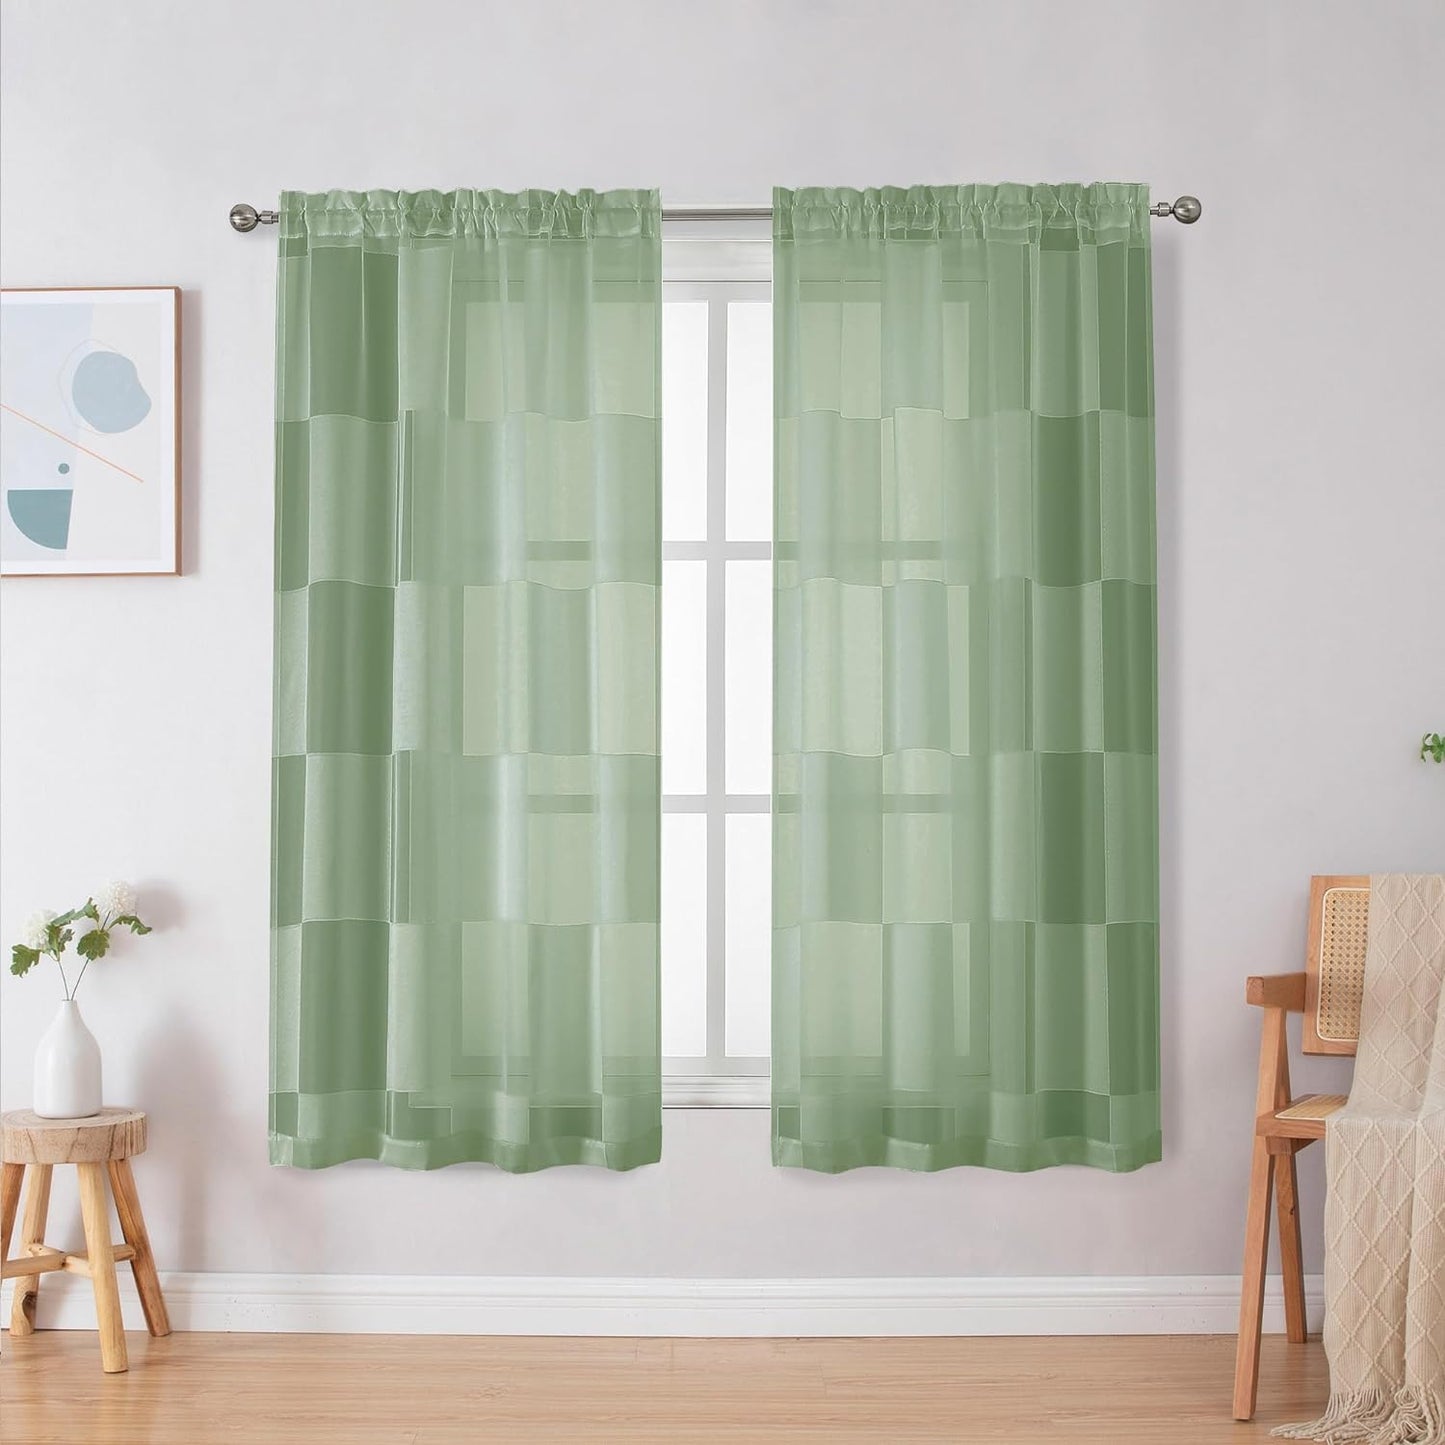 OVZME Sage Green Sheer Bedroom Curtains 84 Inch Length 2 Panels Set, Dual Rod Pocket Clip Checkered Window Curtains for Living Room, Light Filtering & Privacy Sheer Green Drapes, Each 42W X 84L  OVZME Sage Green 42W X 63L 